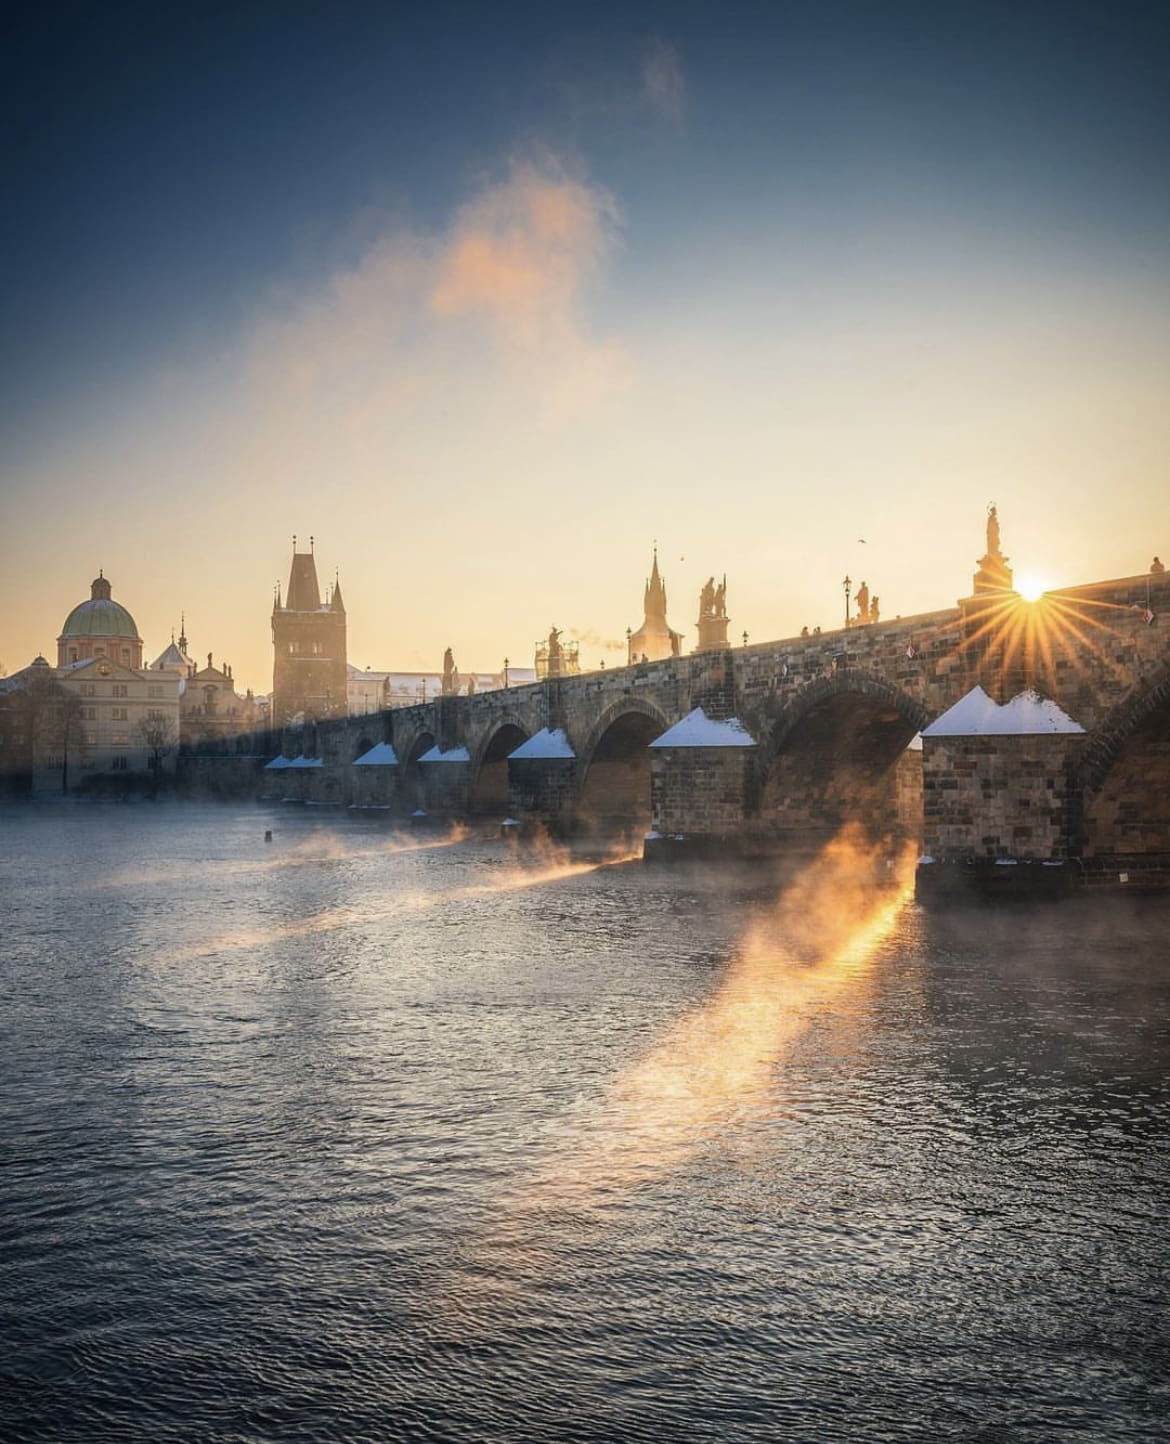 Charles Bridge on a misty morning - 12 Of The Best City Breaks in Europe